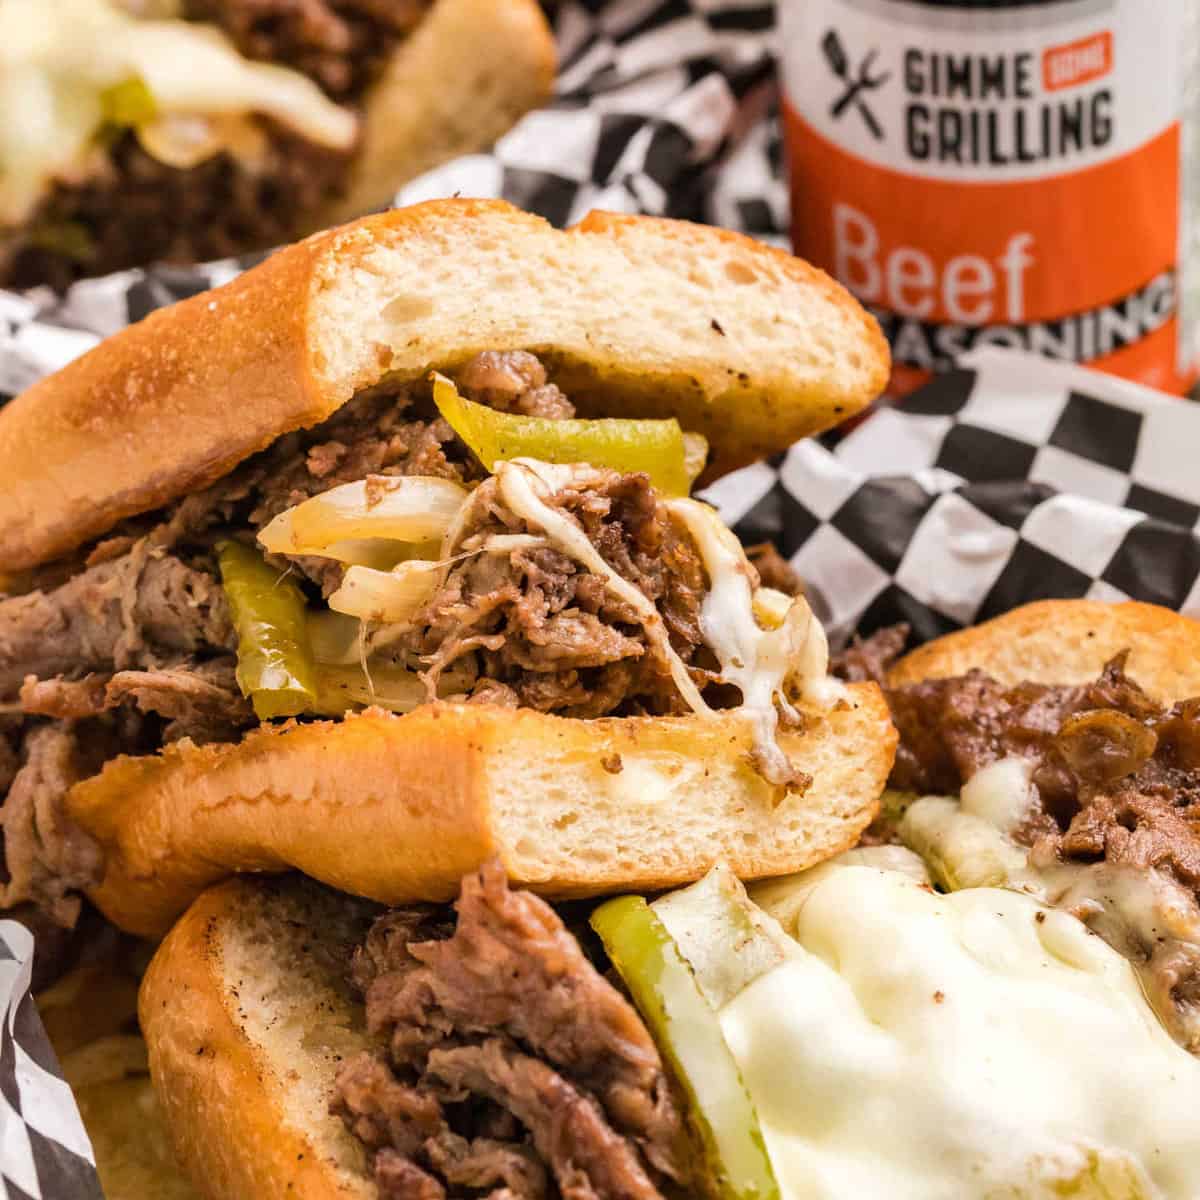 Blackstone Philly Cheesesteak - Gimme Some Grilling ®